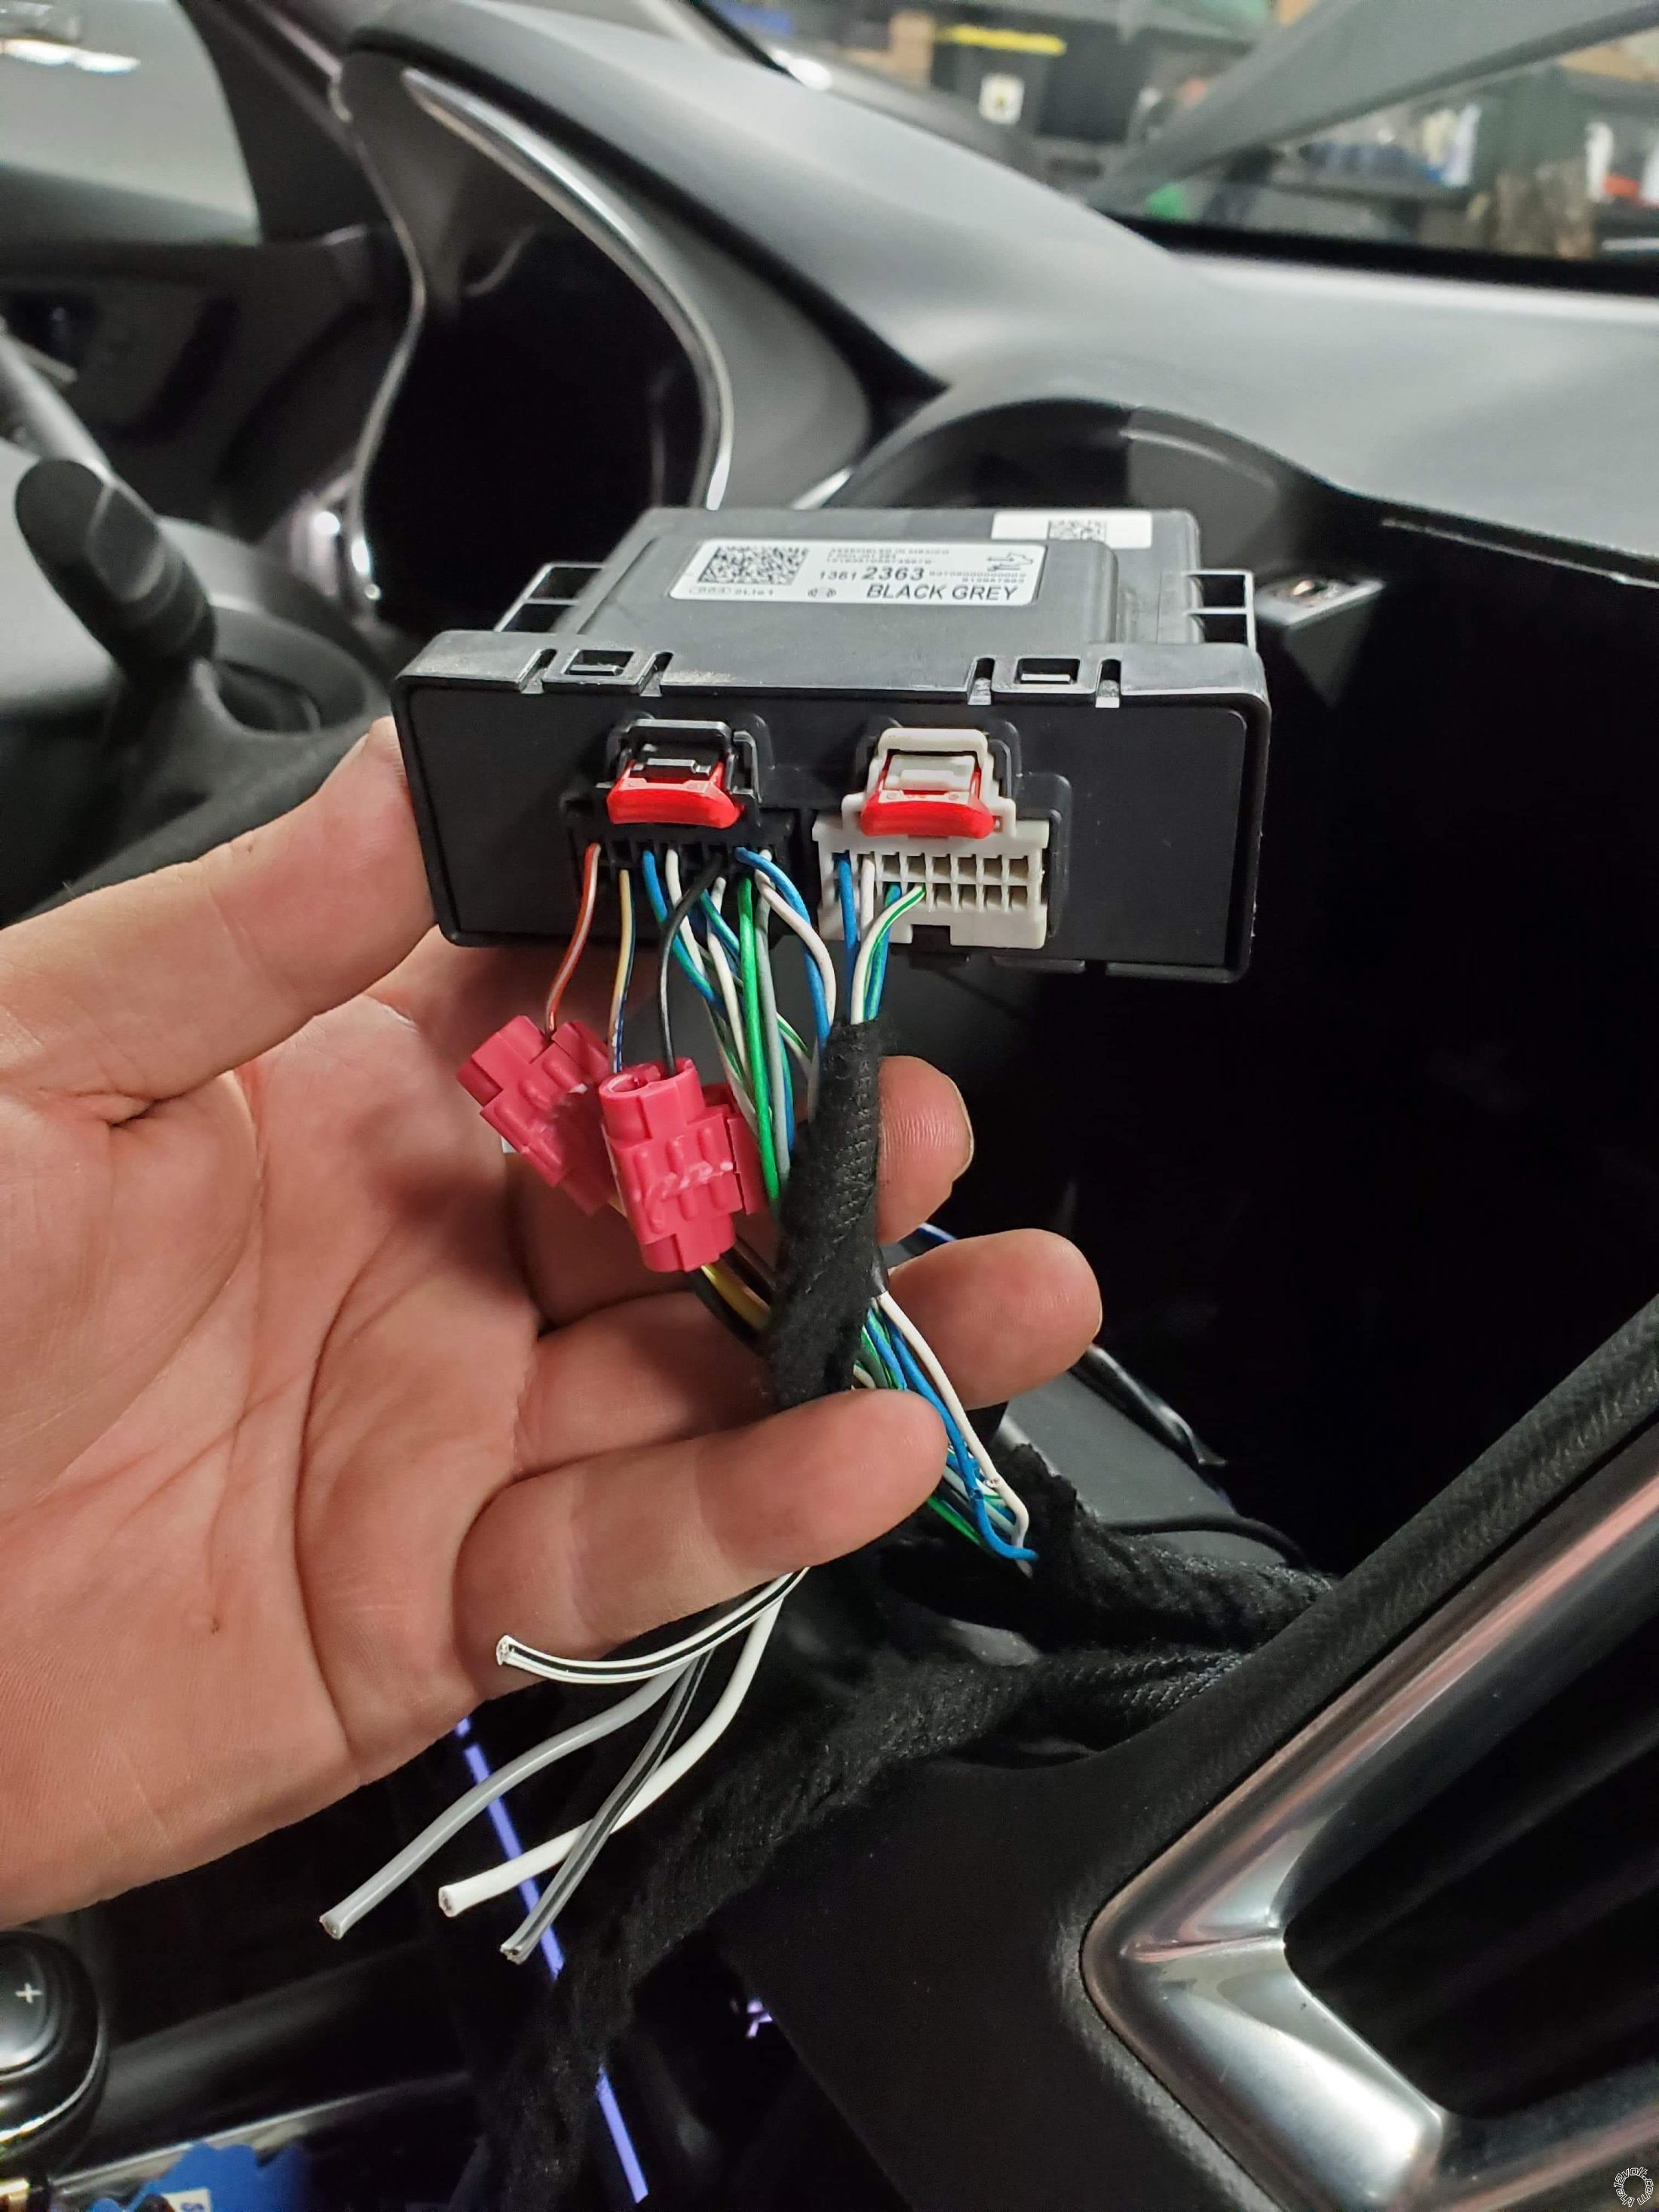 2017 Chevrolet Malibu Stereo Wiring Colors -- posted image.